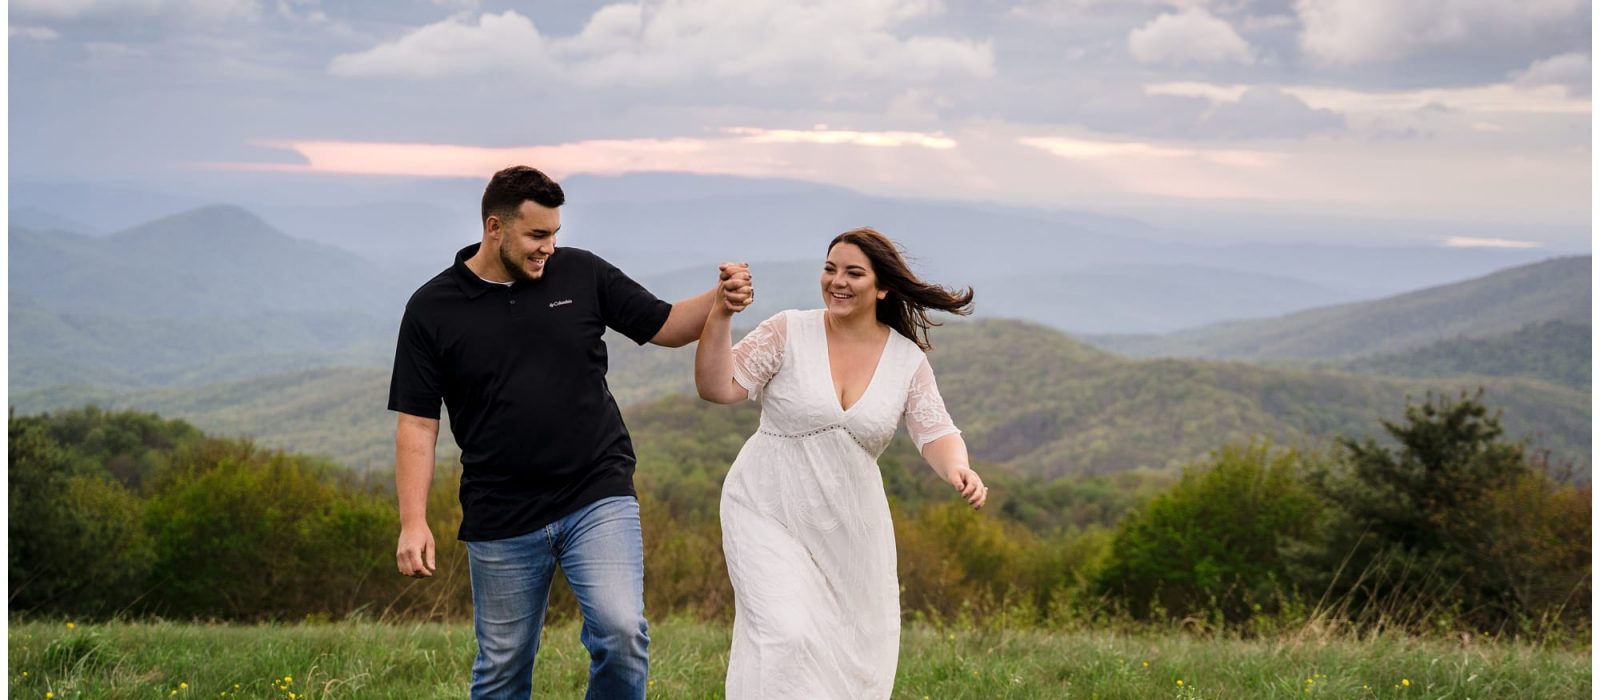 young engaged couple holding hands walking through grassy field overlooking mountain range smiling at one another